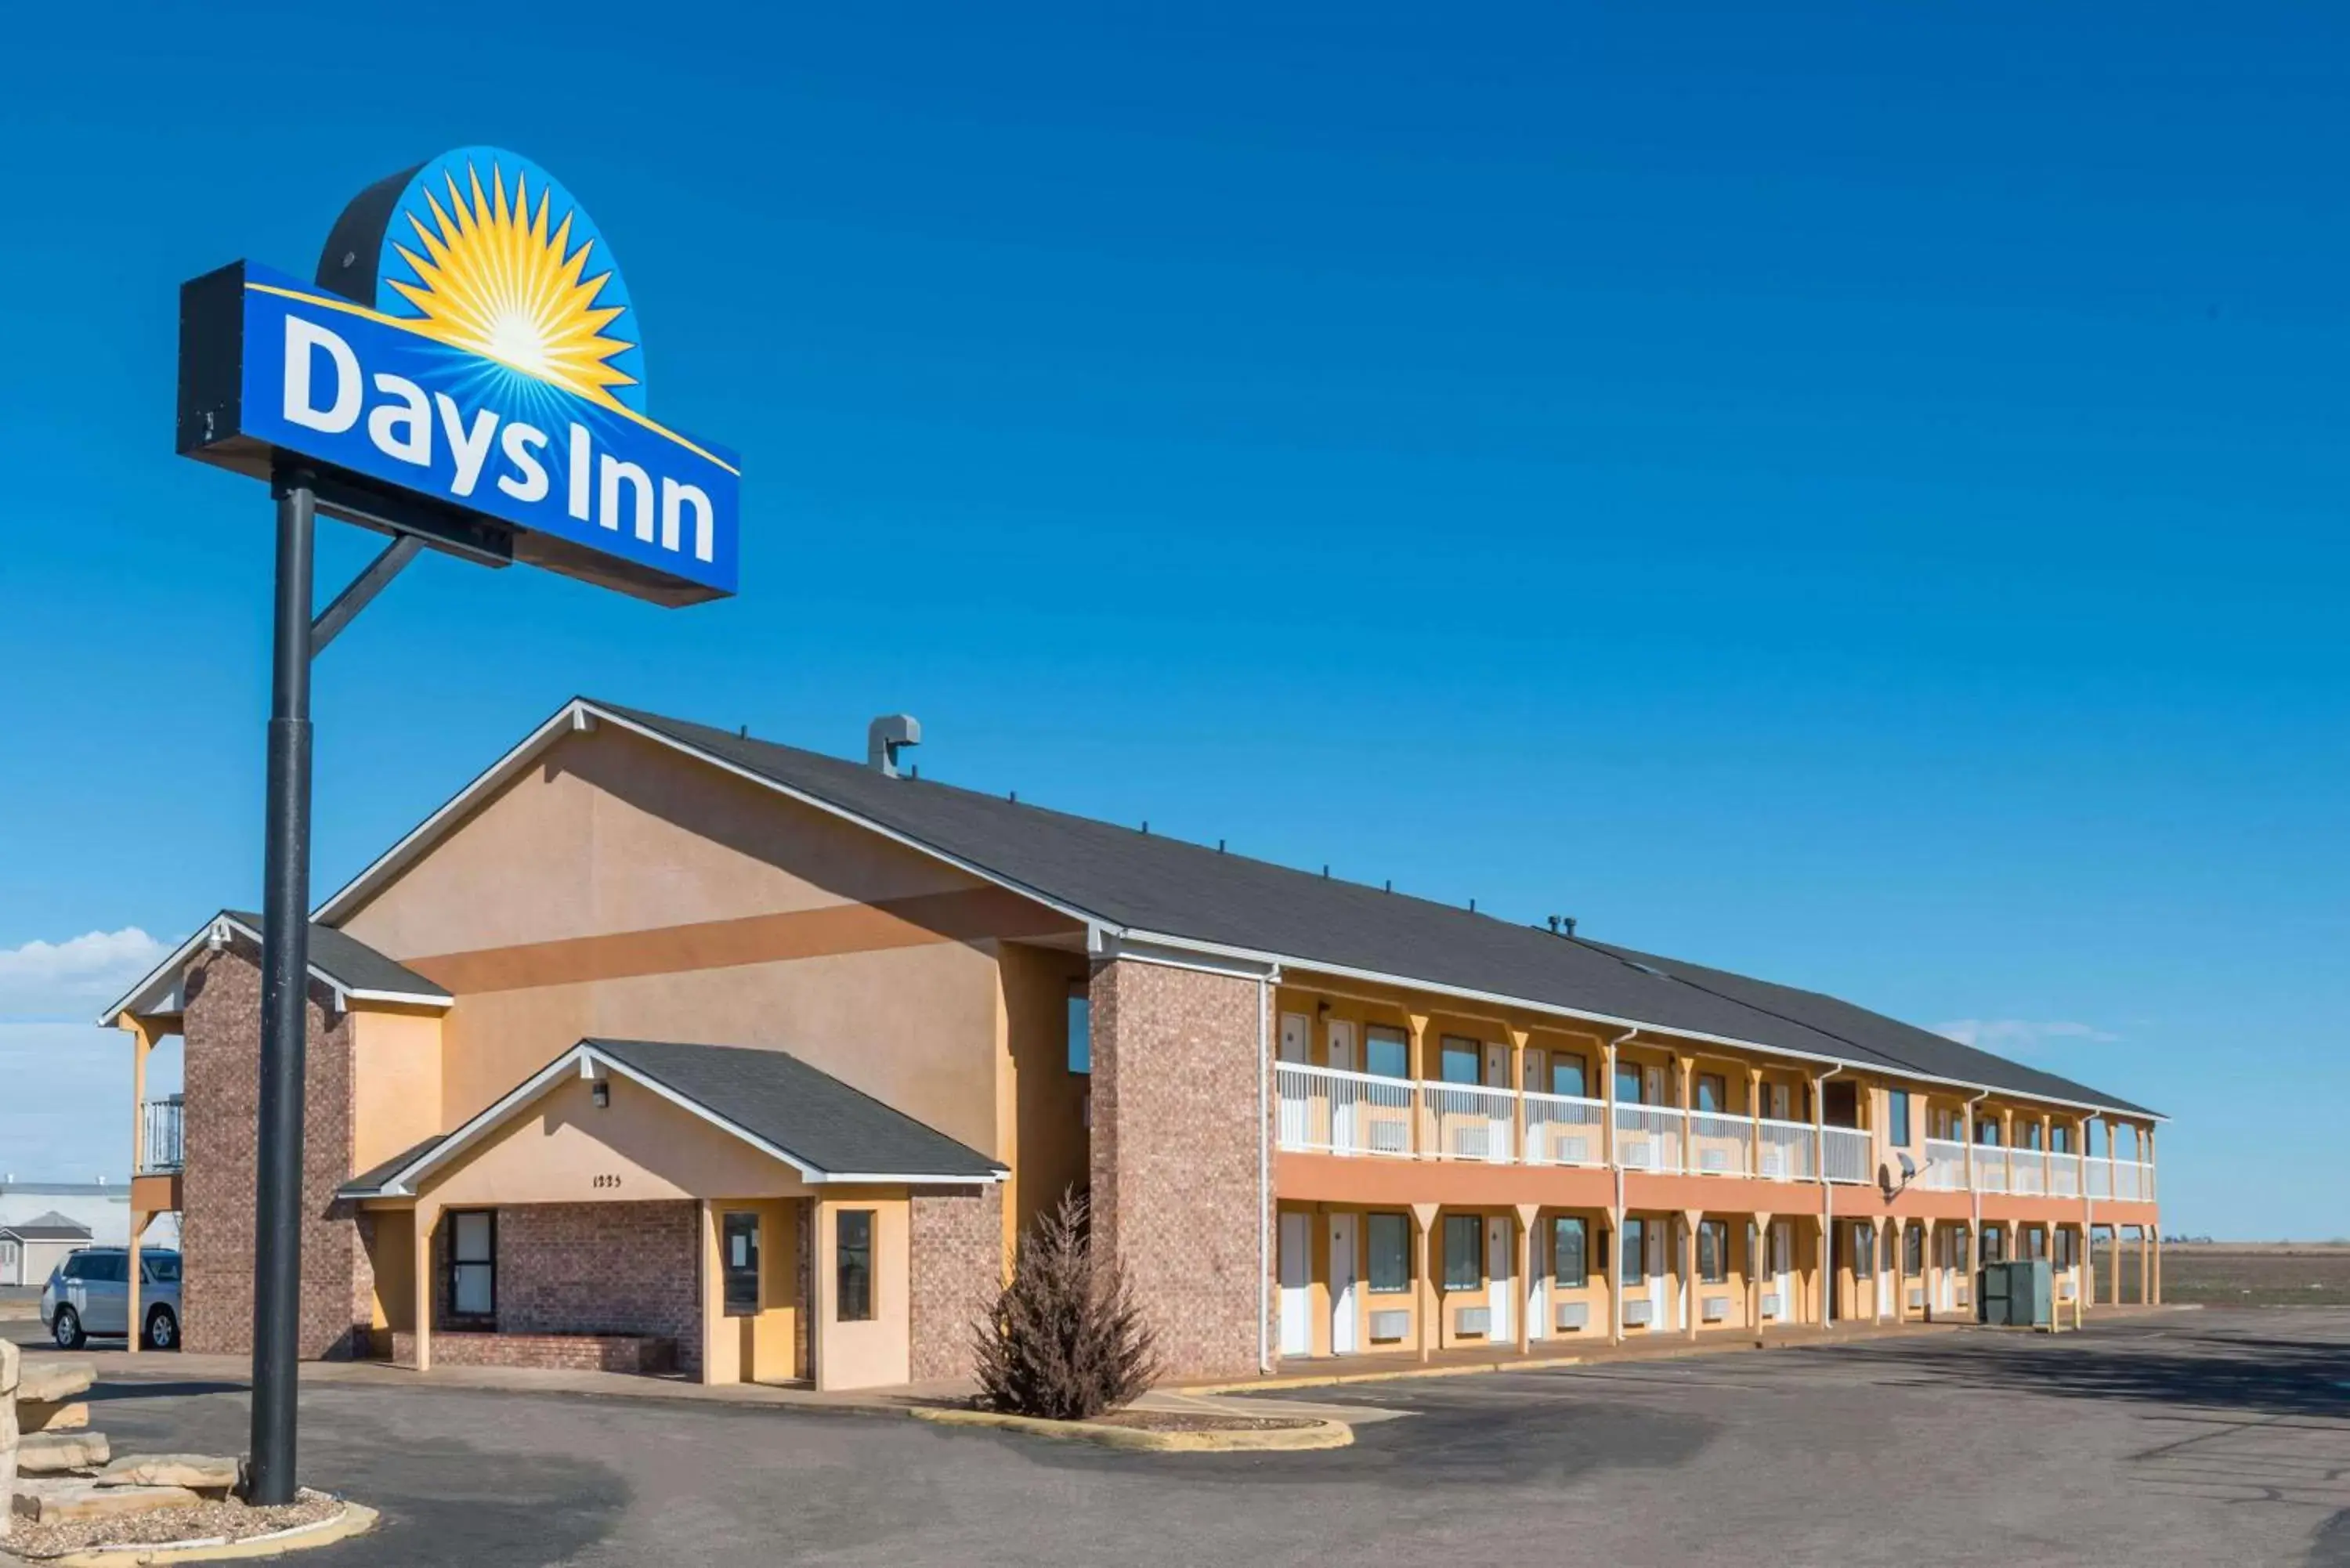 Property Building in Days Inn by Wyndham Russell